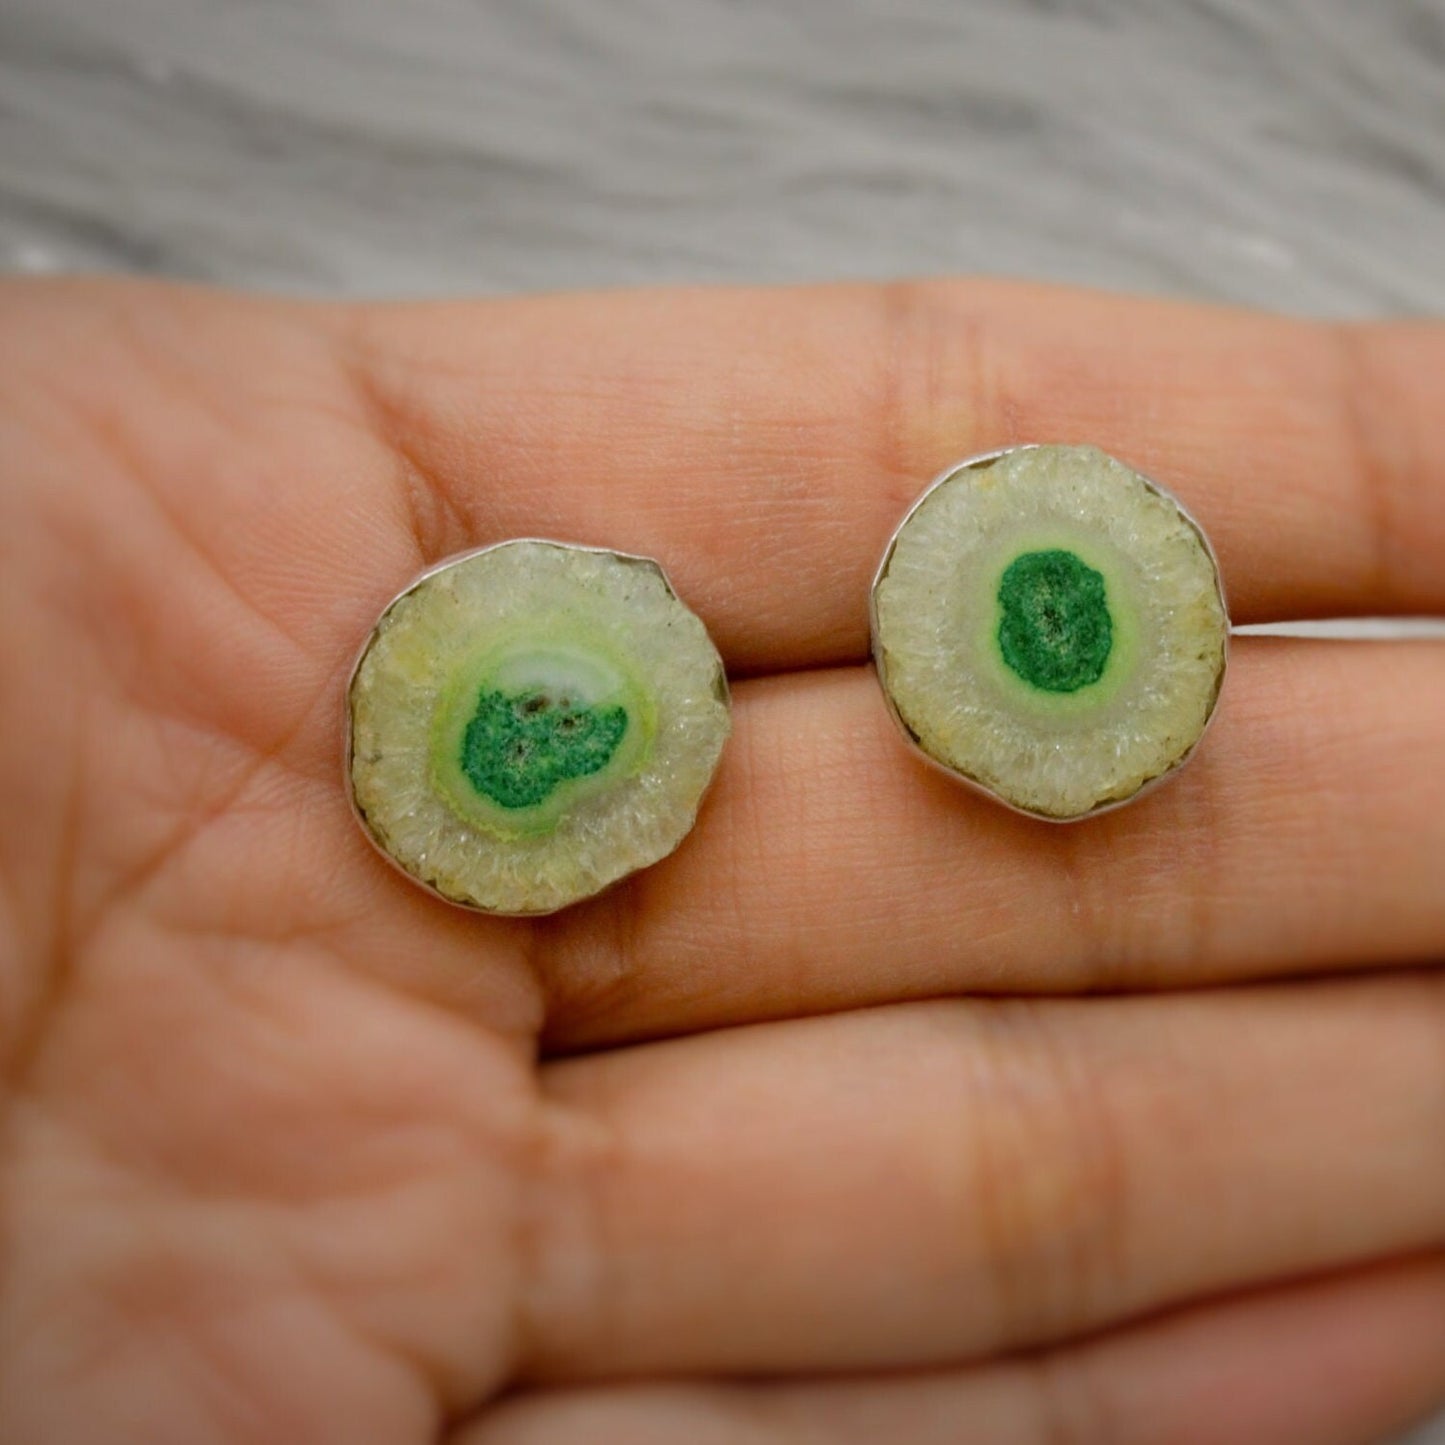 Green Druzy Agate Silver Stud Earrings, Small Gemstone Studs, Agate Jewelry, Sterling Silver Dainty Studs, Gifts For Her